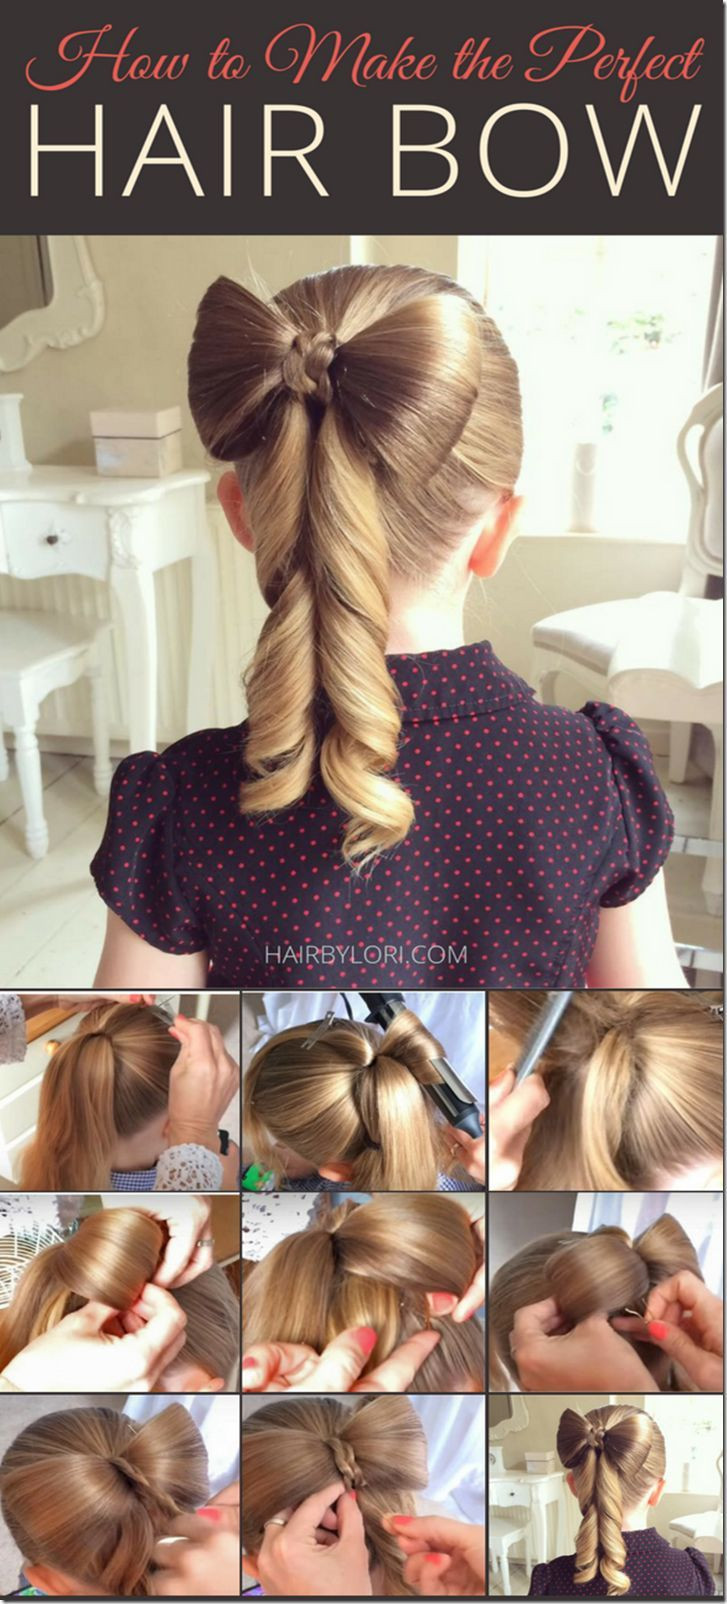 Easy Hairstyles For Kids Step By Step
 10 Best and Easy Hairstyle Ideas for Summer 2017